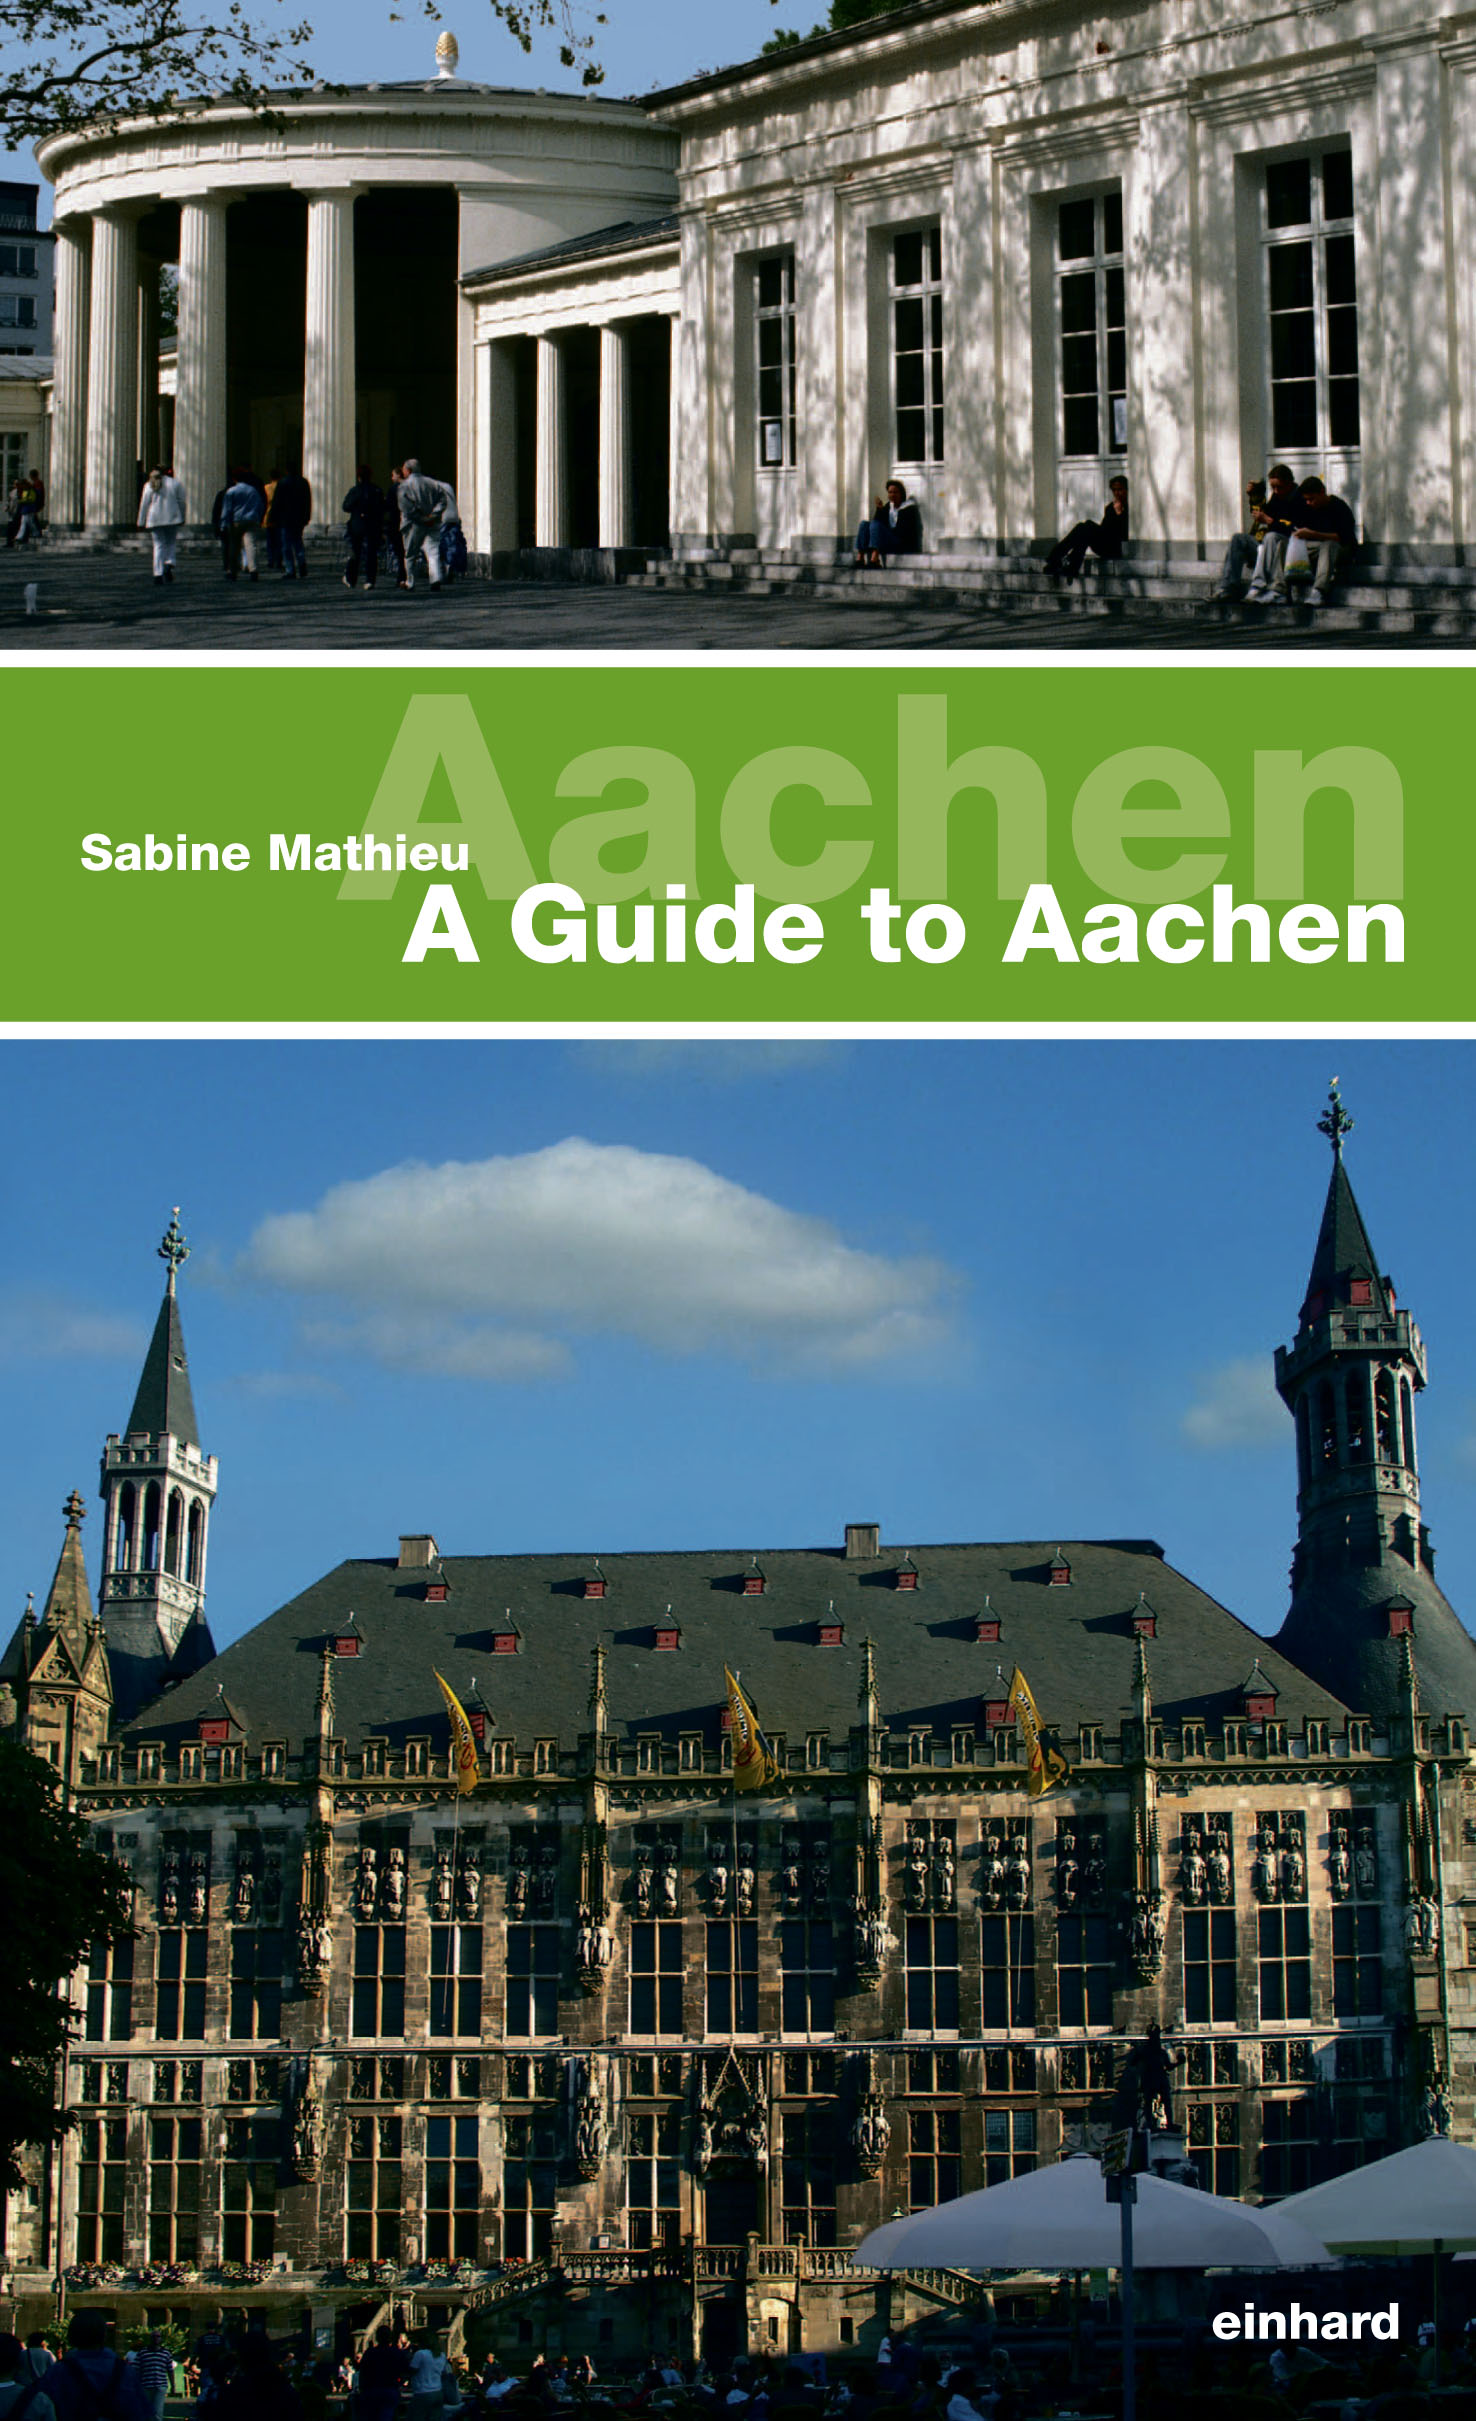 A Guide to Aachen